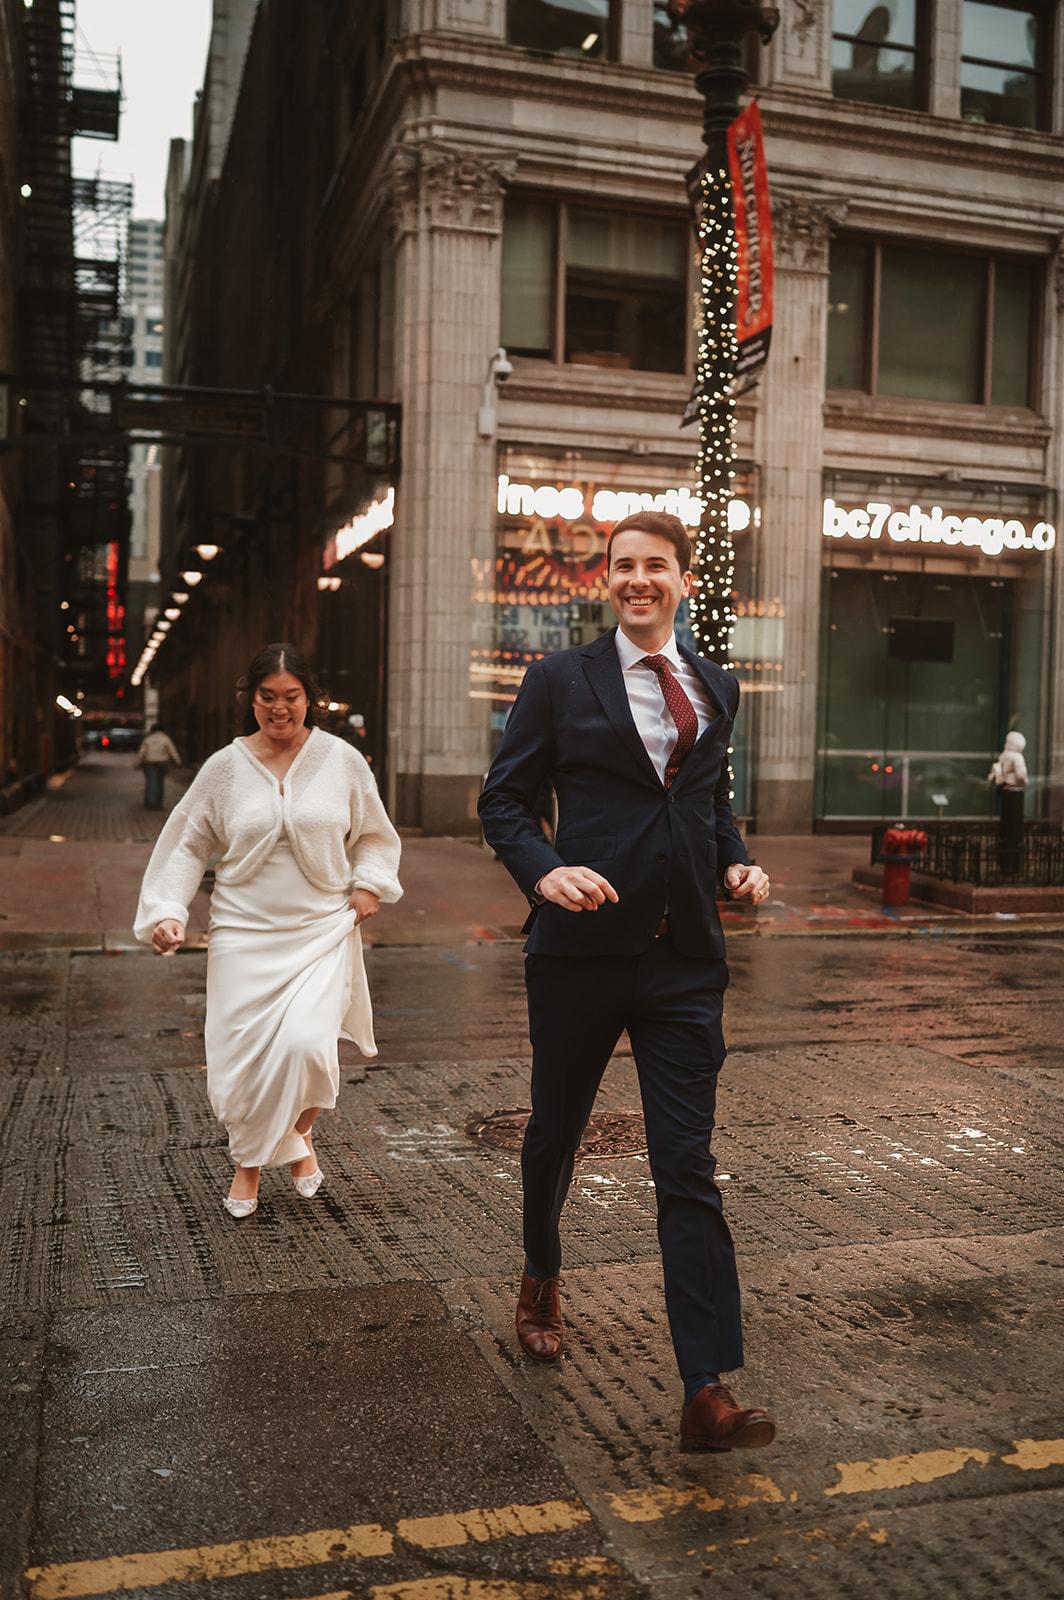 Intimate rainy day Chicago elopement wedding photography - walking through the alleys of Chicago